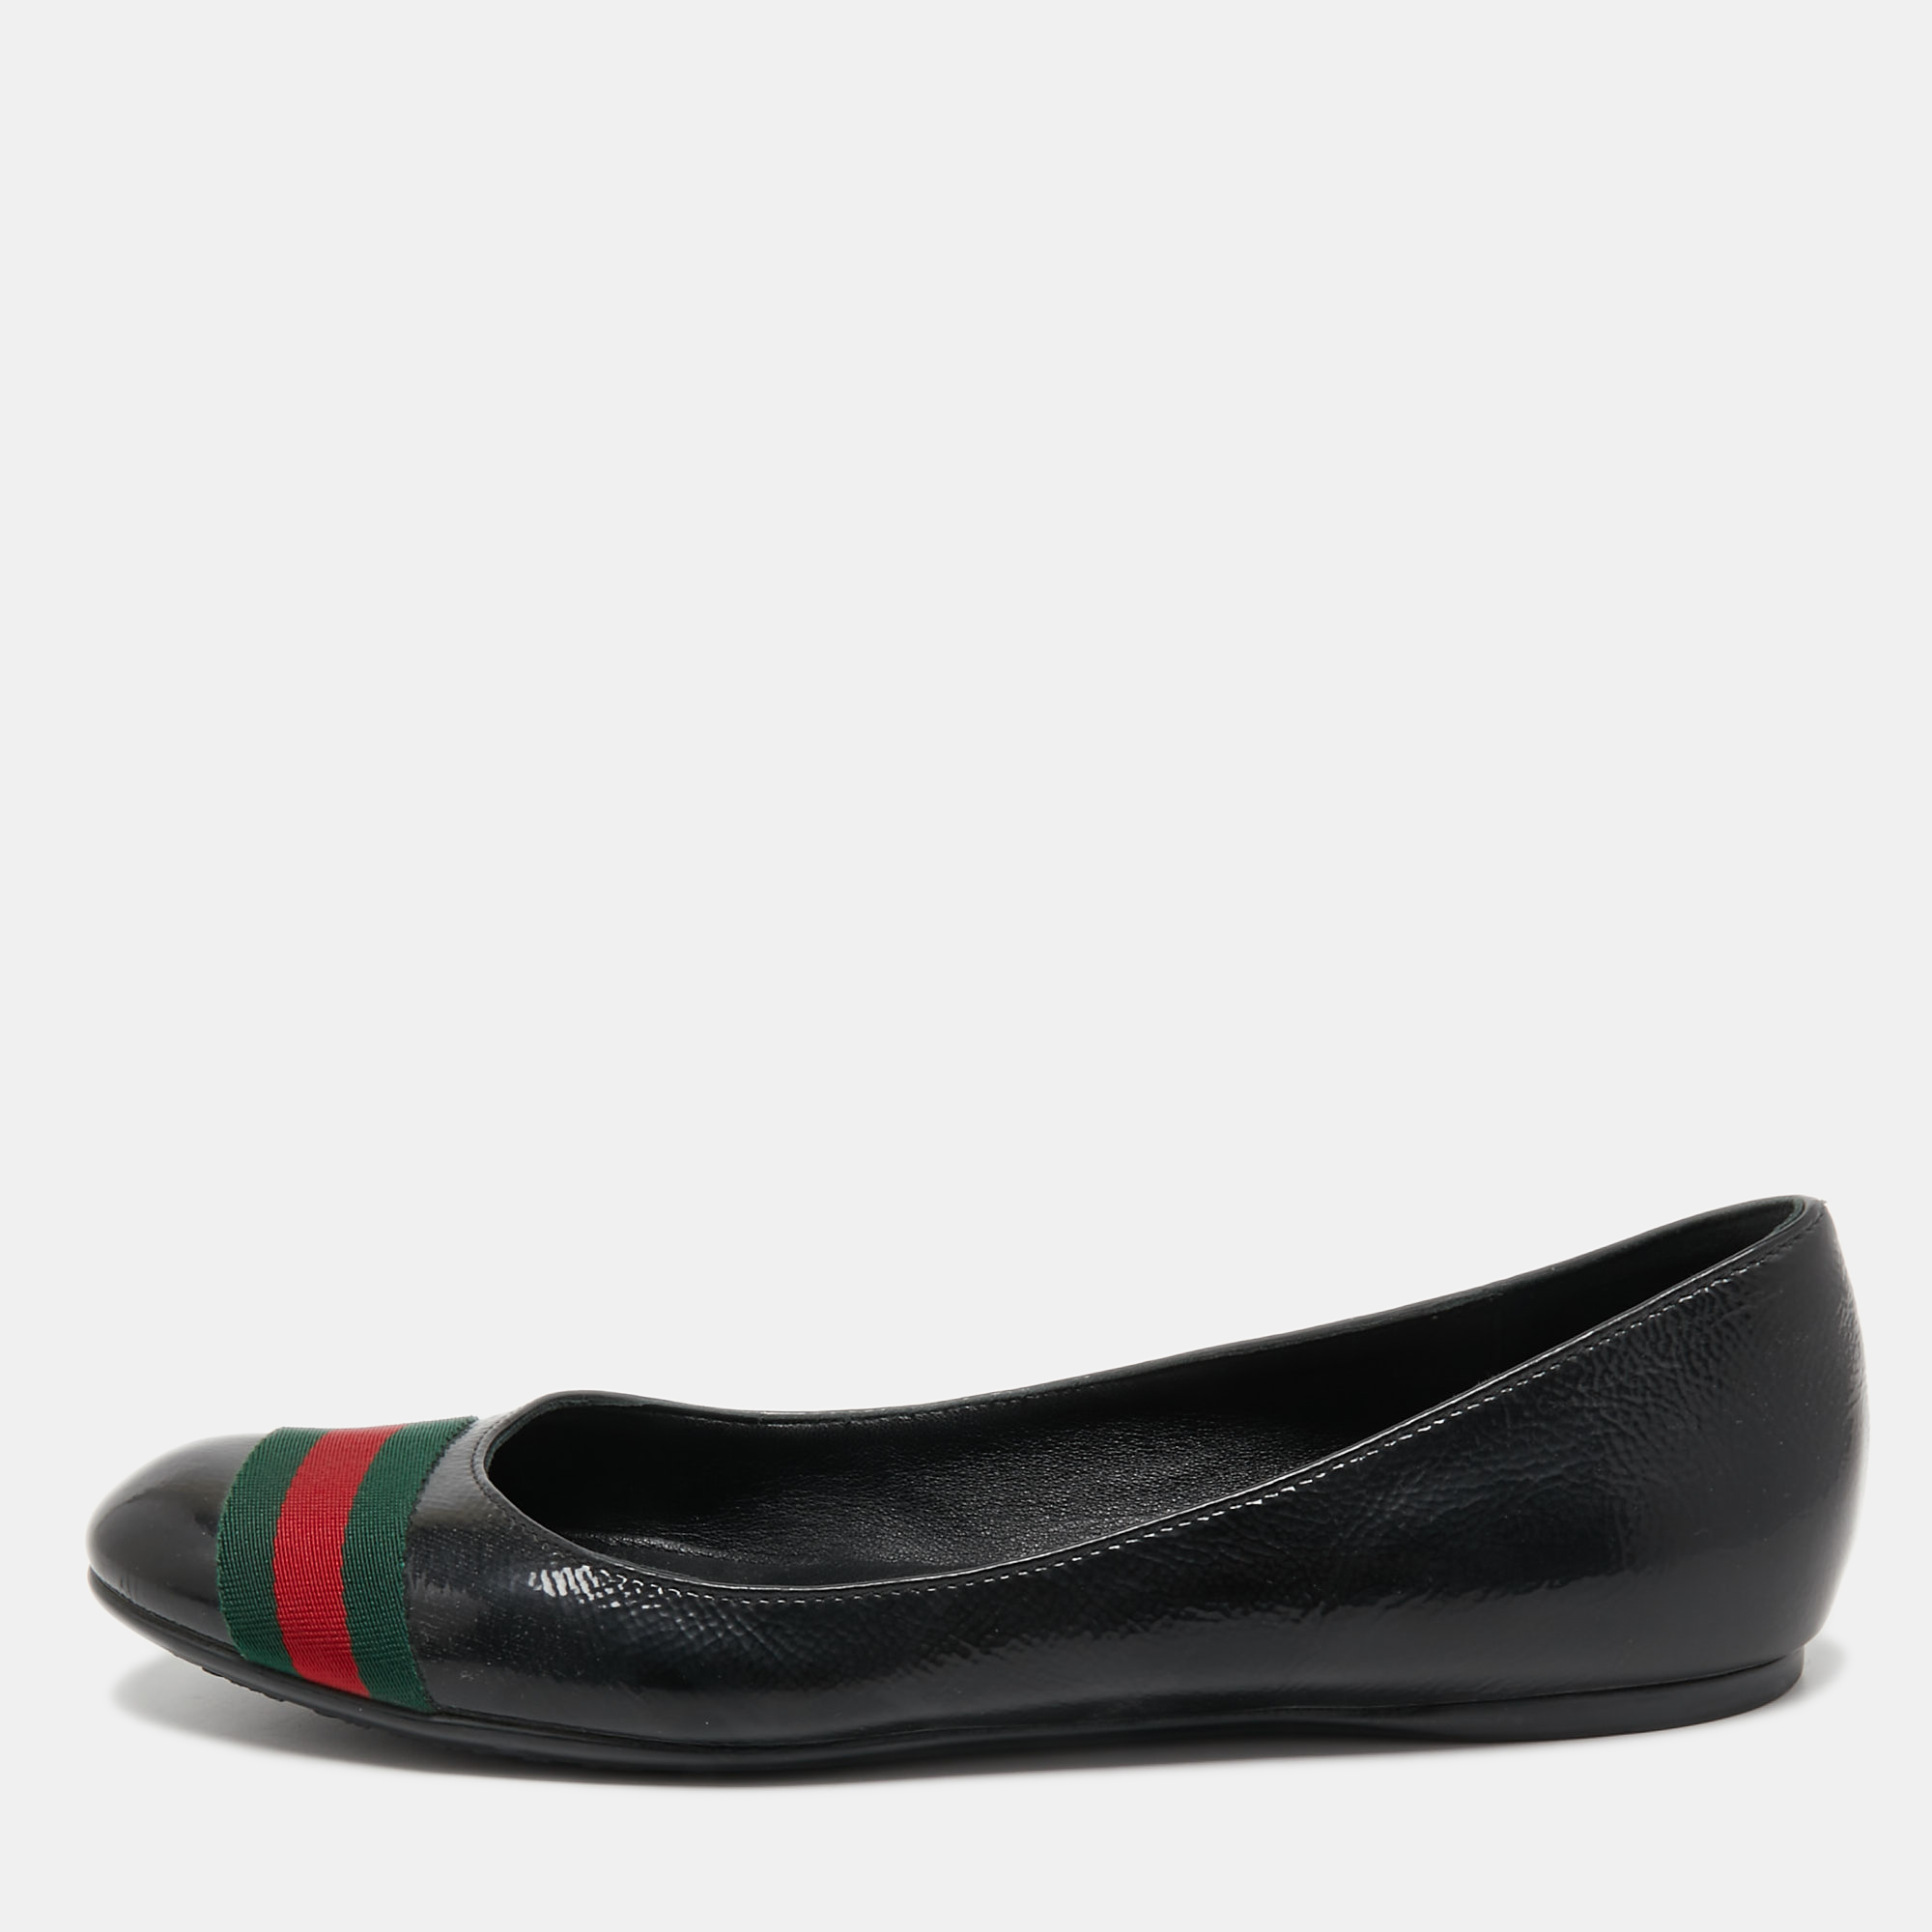 Pre-owned Gucci Black Patent Leather Web Stripe Ballet Flats Size 38.5